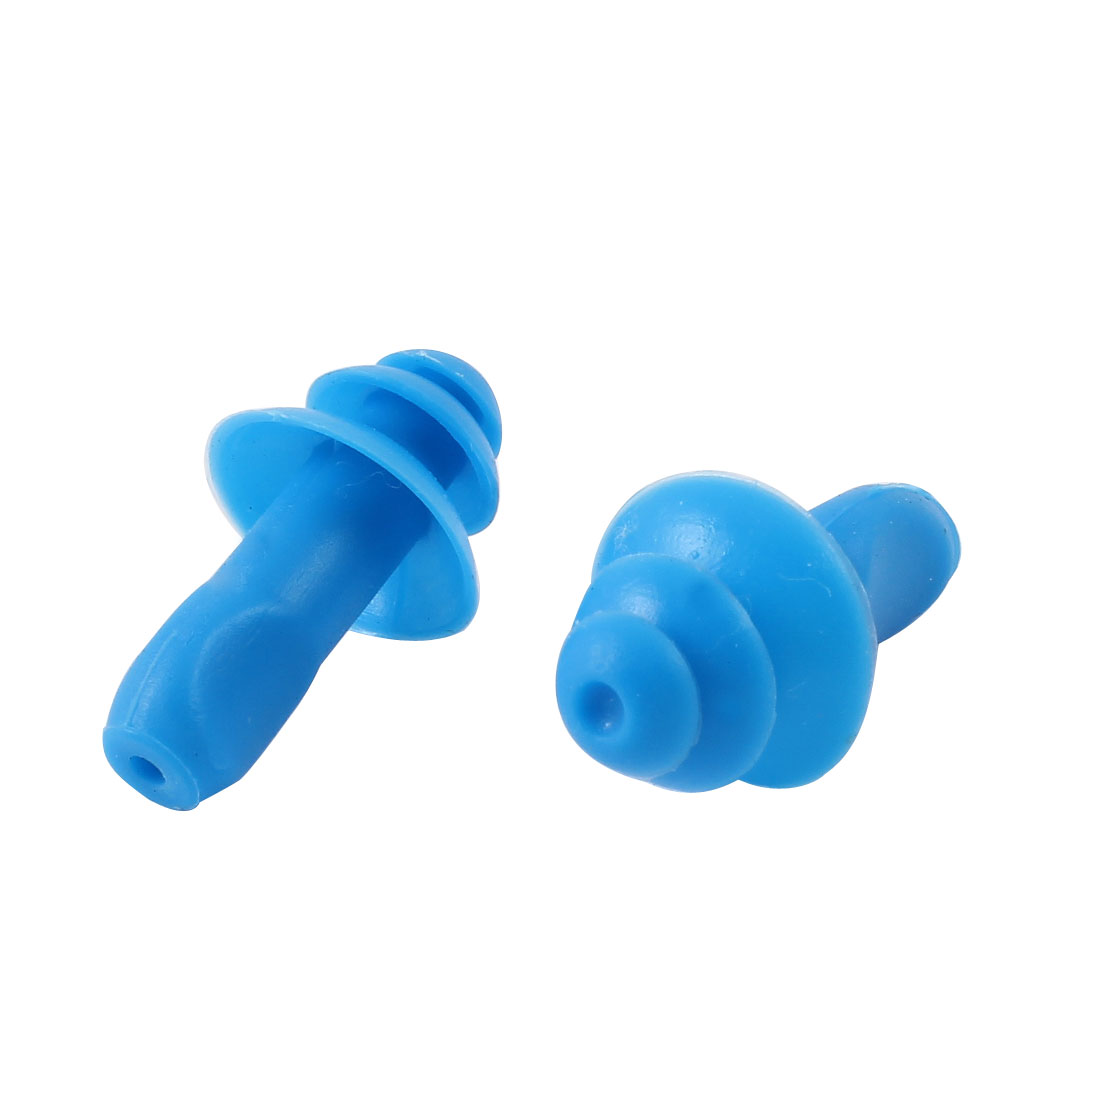 Unique Bargains Swim Sports Ear Water Resistance Gear Silicone Swimming Ear Plugs For Swimmer